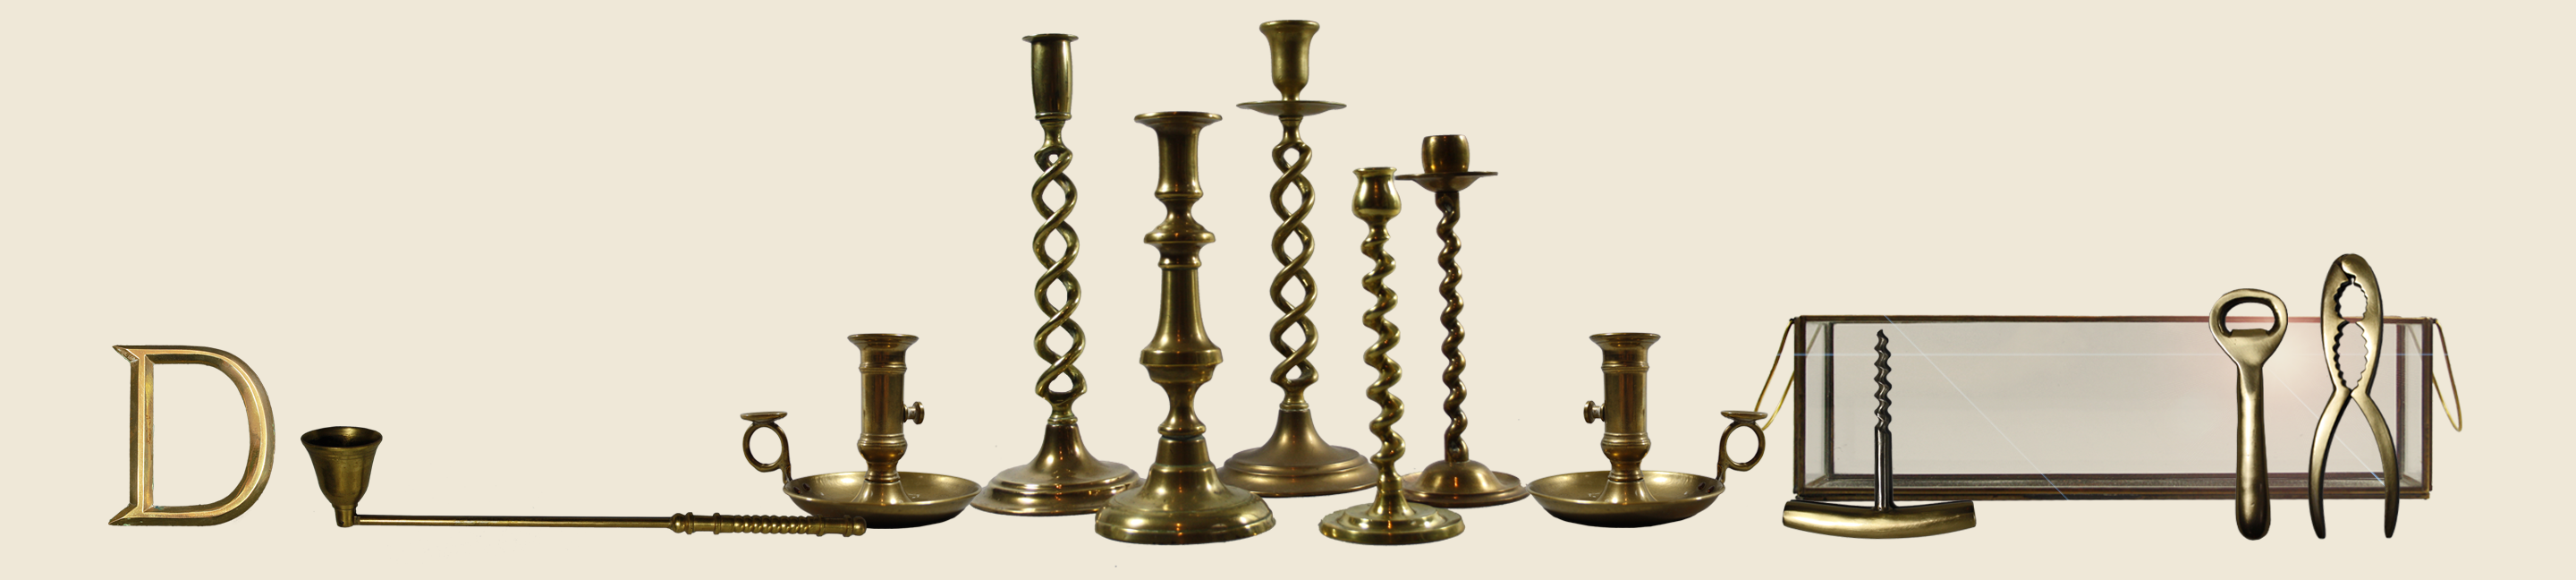 brass-collection-candlesticks-tealights-christmas-table decorations-metal-gold-candle